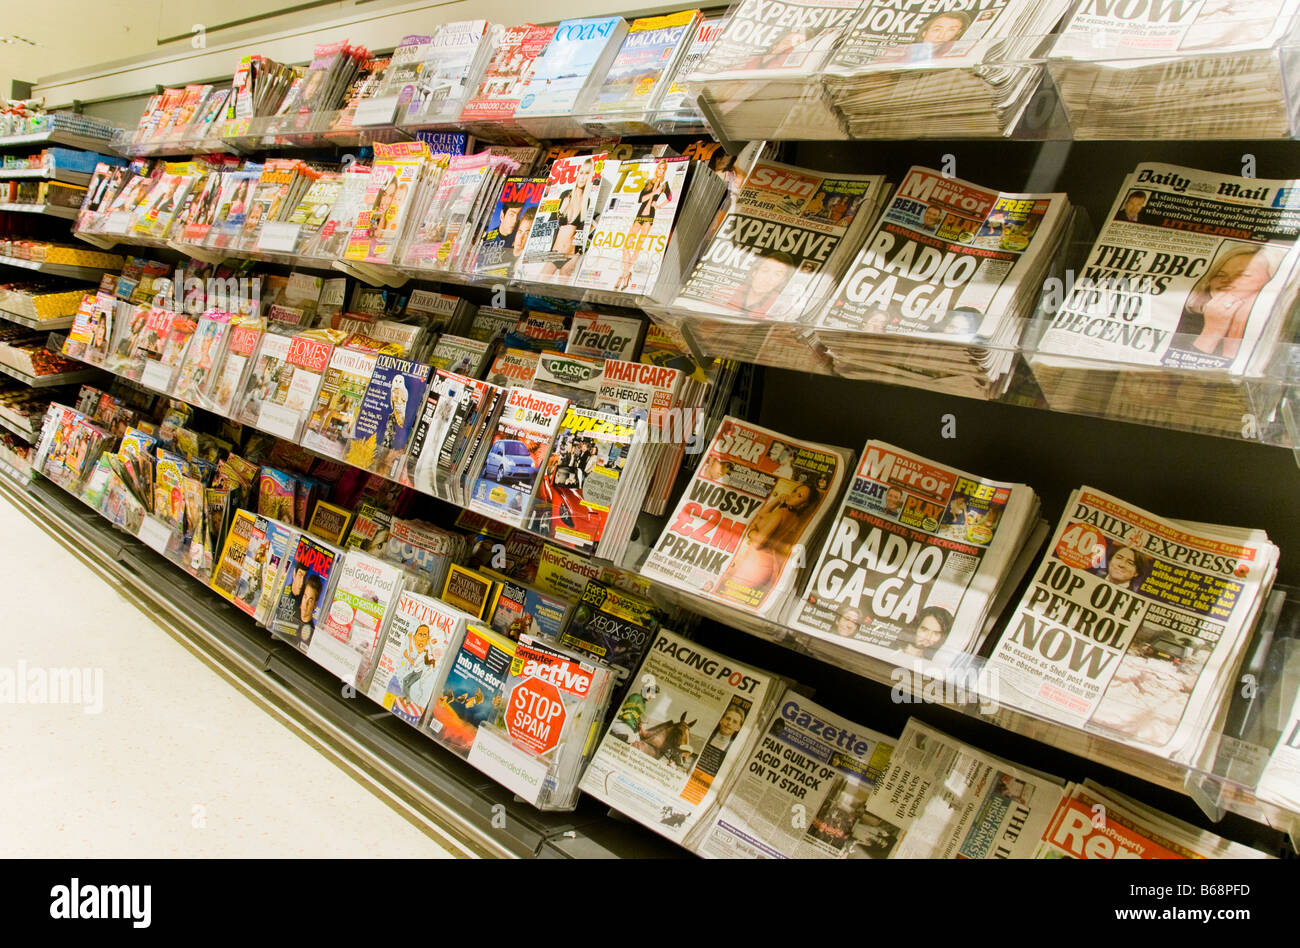 Newspapers and Magazines for sale in a supermarket in Britain Stock Photo